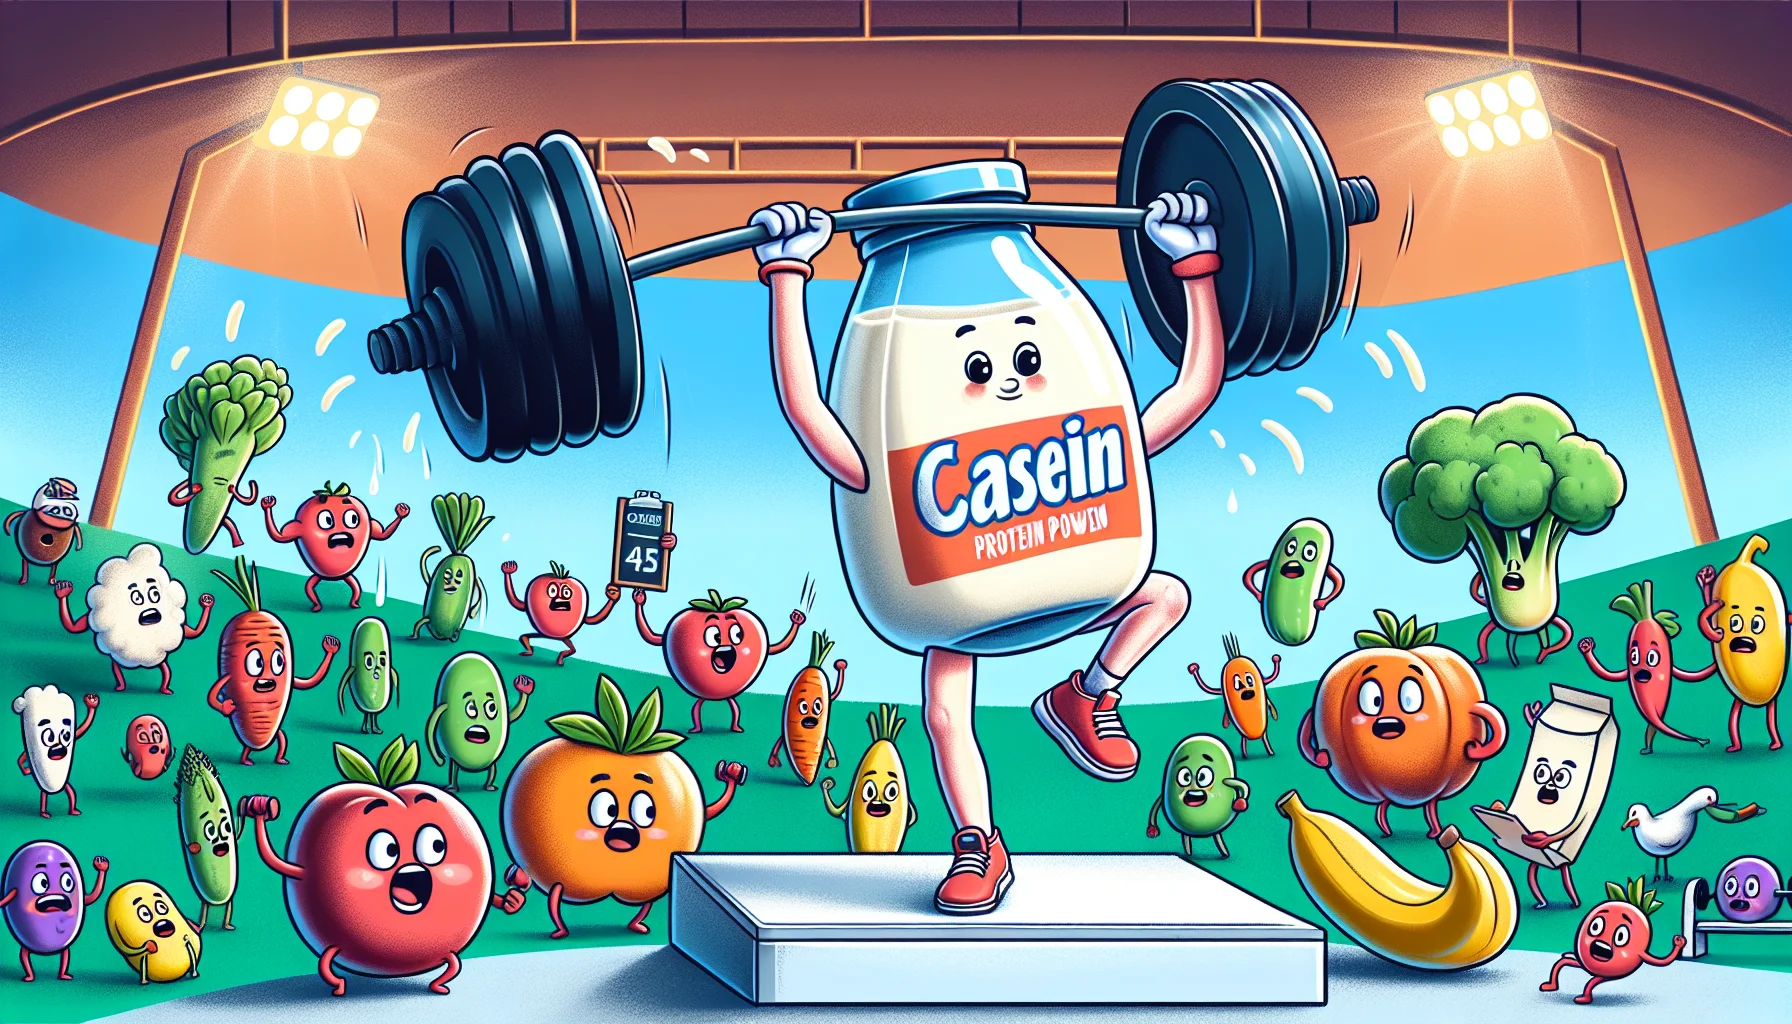 Illustrate a whimsical and captivating scene portraying the benefits of casein protein for athletes. Picture a large, comedic scoop of casein protein powder doing an impressive heavy barbell lift, surrounded by a crowd of fruit and vegetables animated with faces in awe. To the side, depict a milk bottle, a symbol of the protein source, acting as a coach, complete with a whistle and clipboard. The background should be a fun and creative interpretation of a sports gym, with additional elements such as dumbbells and a weight bench.